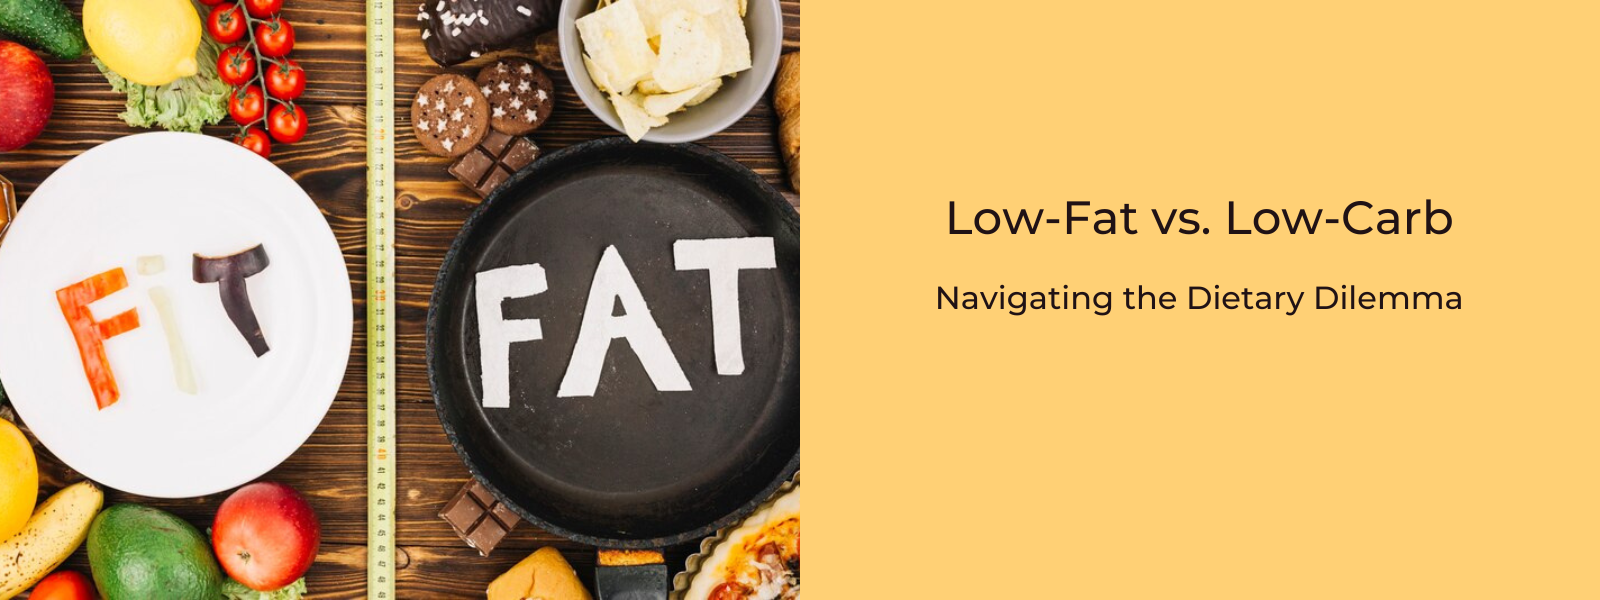 Low-Fat vs. Low-Carb: Navigating the Dietary Dilemma